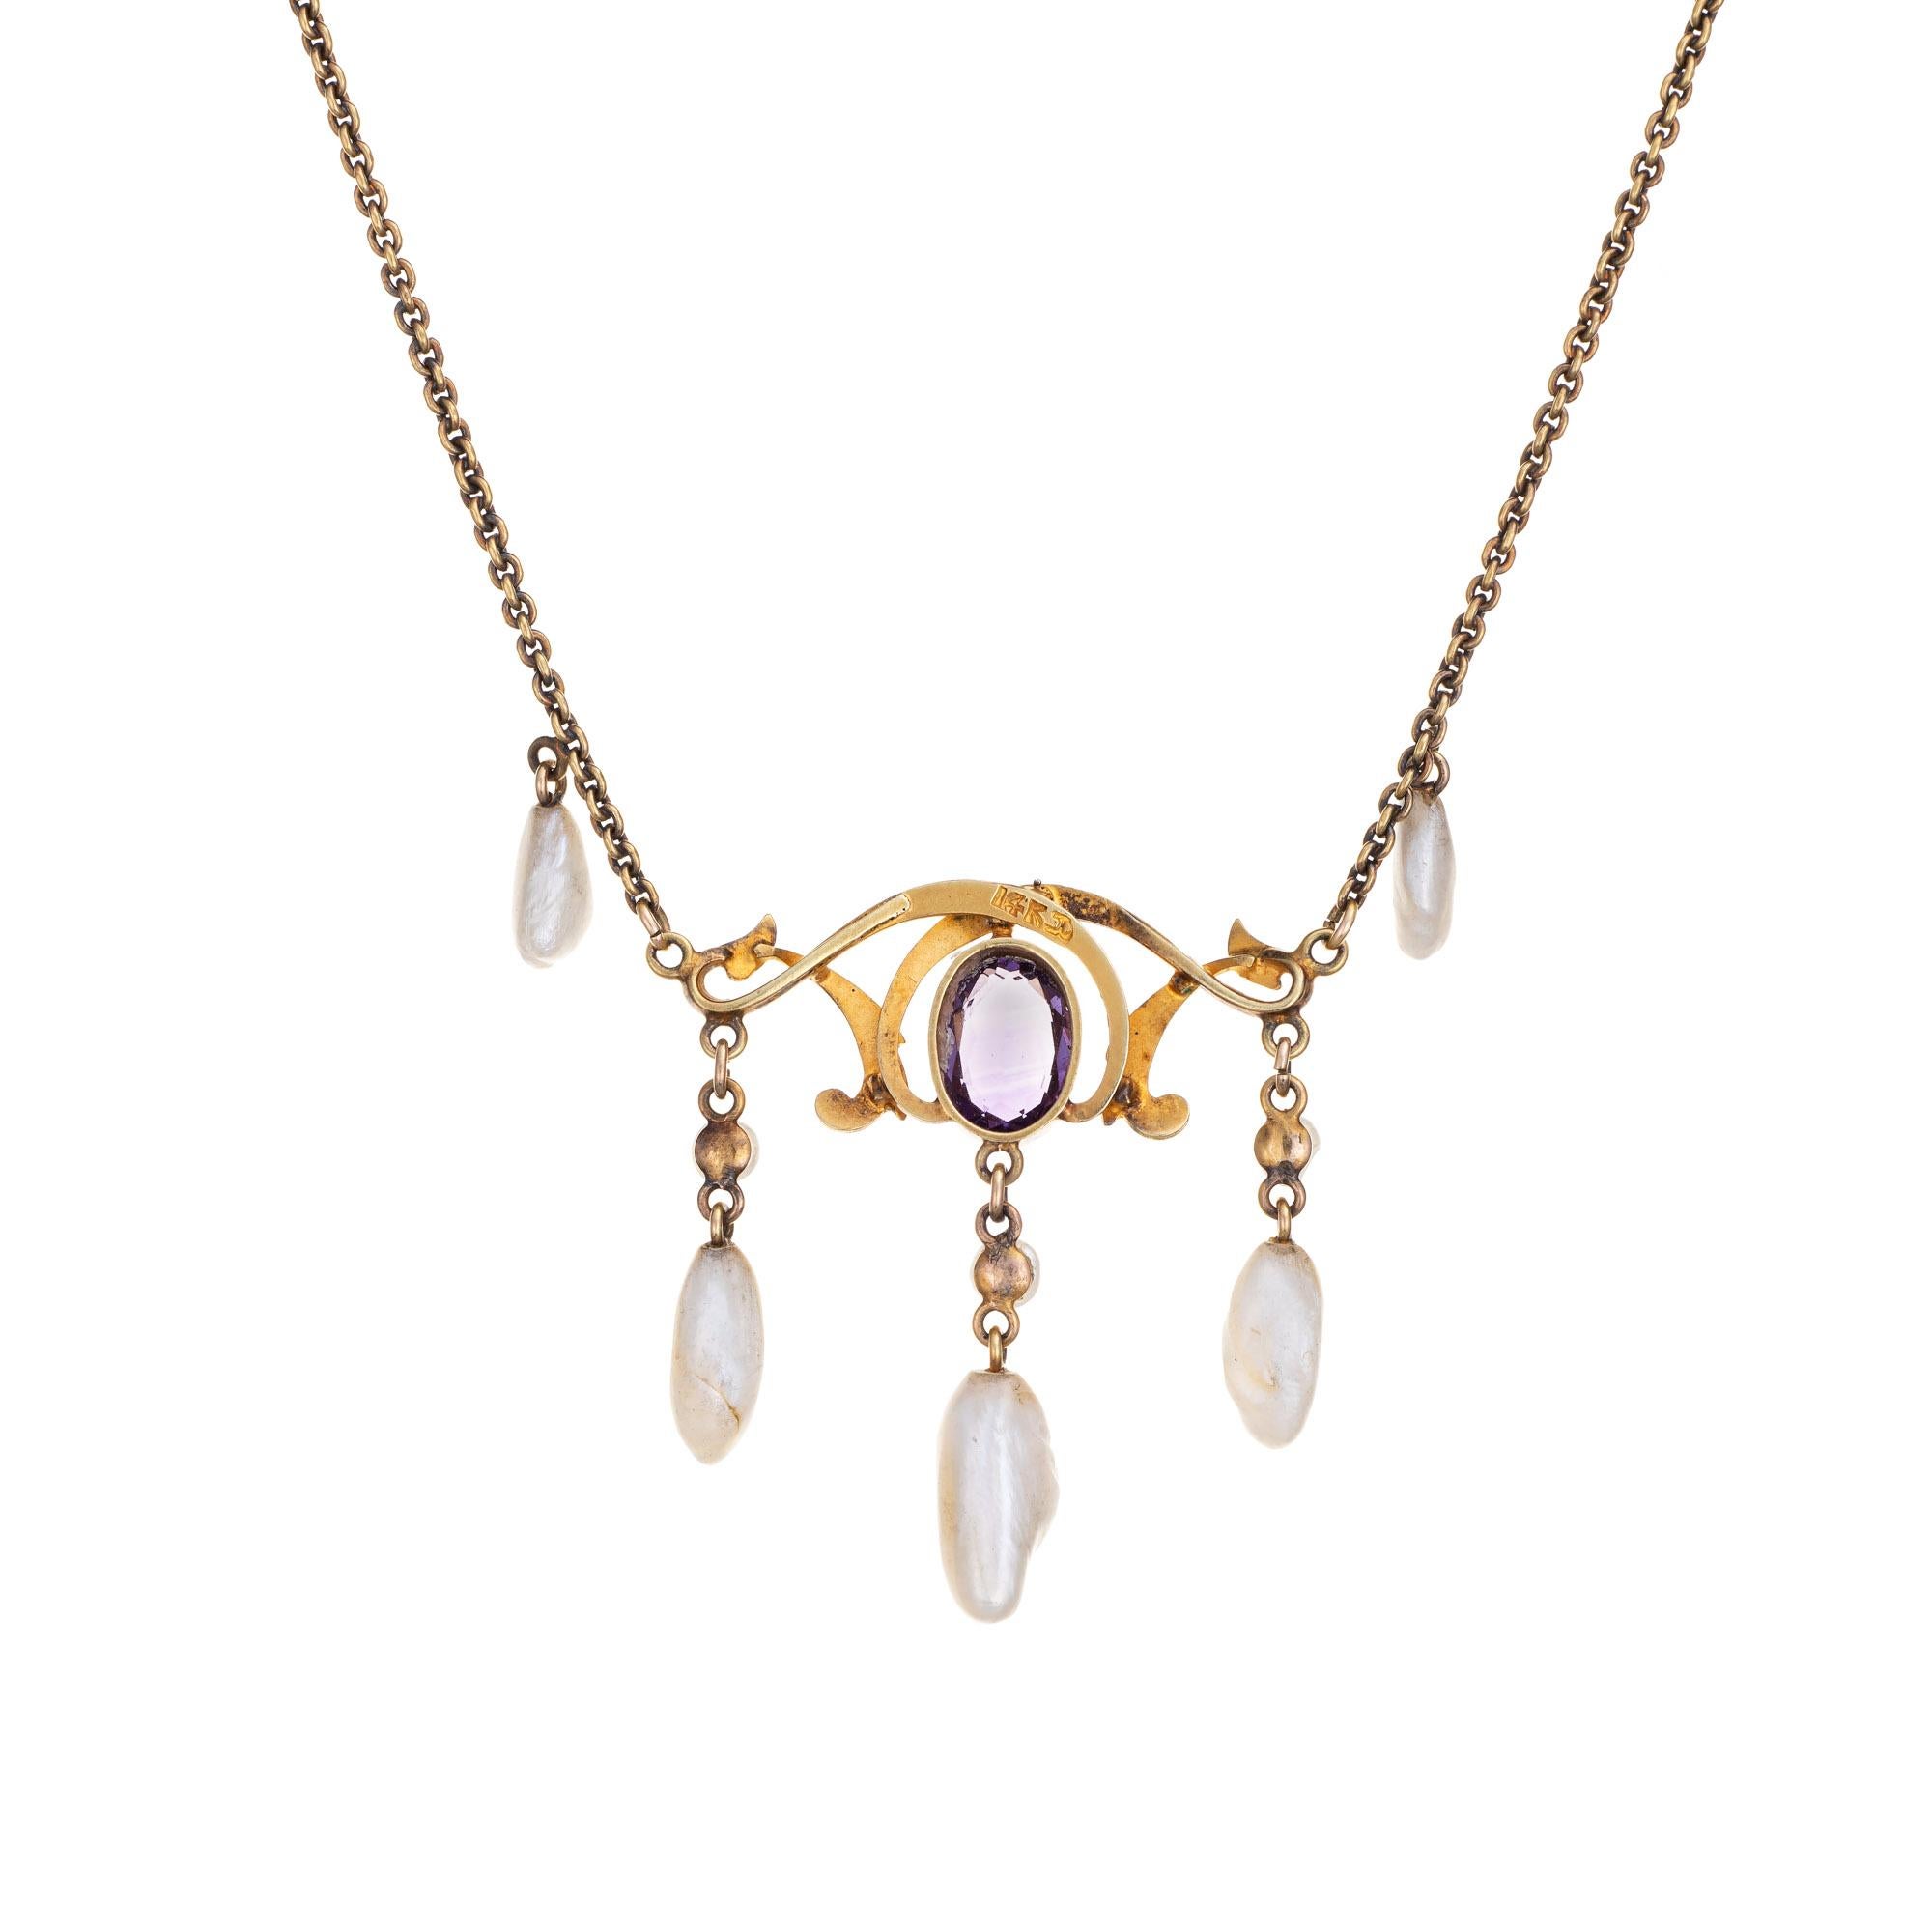 Stylish and finely detailed Art Nouveau drop necklace (circa 1900s to 1910s) crafted in 14 karat yellow gold. 

One estimated .75 carat amethyst, 6mm x 3.5mm to 9mm x 3mm sawtooth pearls and enamel are set into the necklace. The amethyst is in very